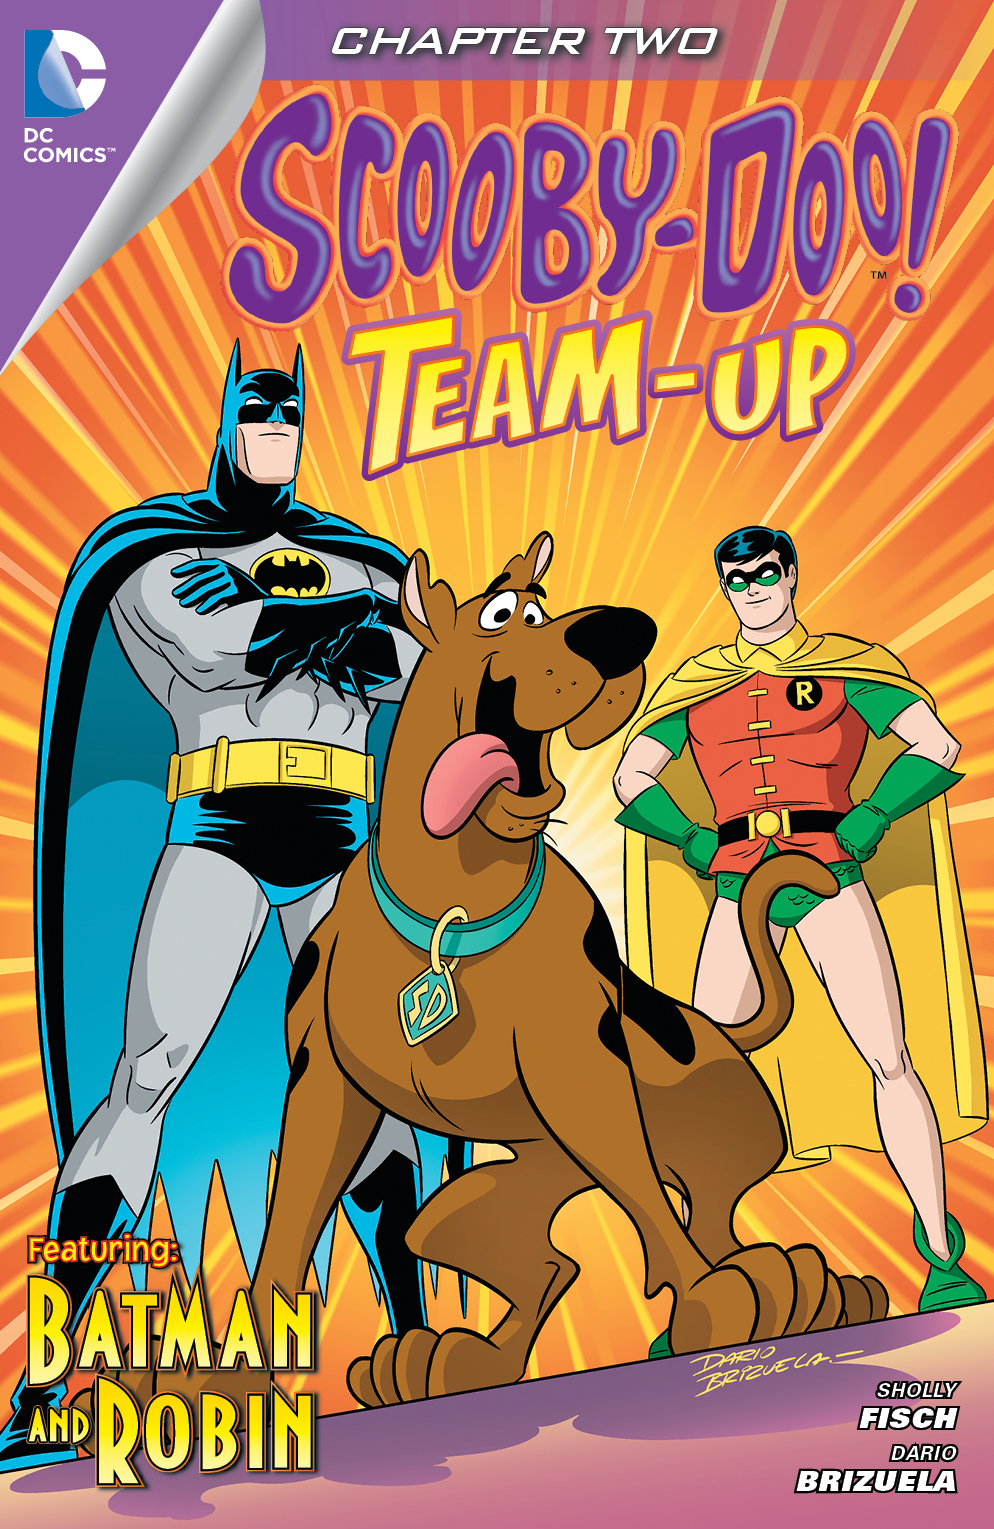 Scooby-Doo Team-Up #2 preview images